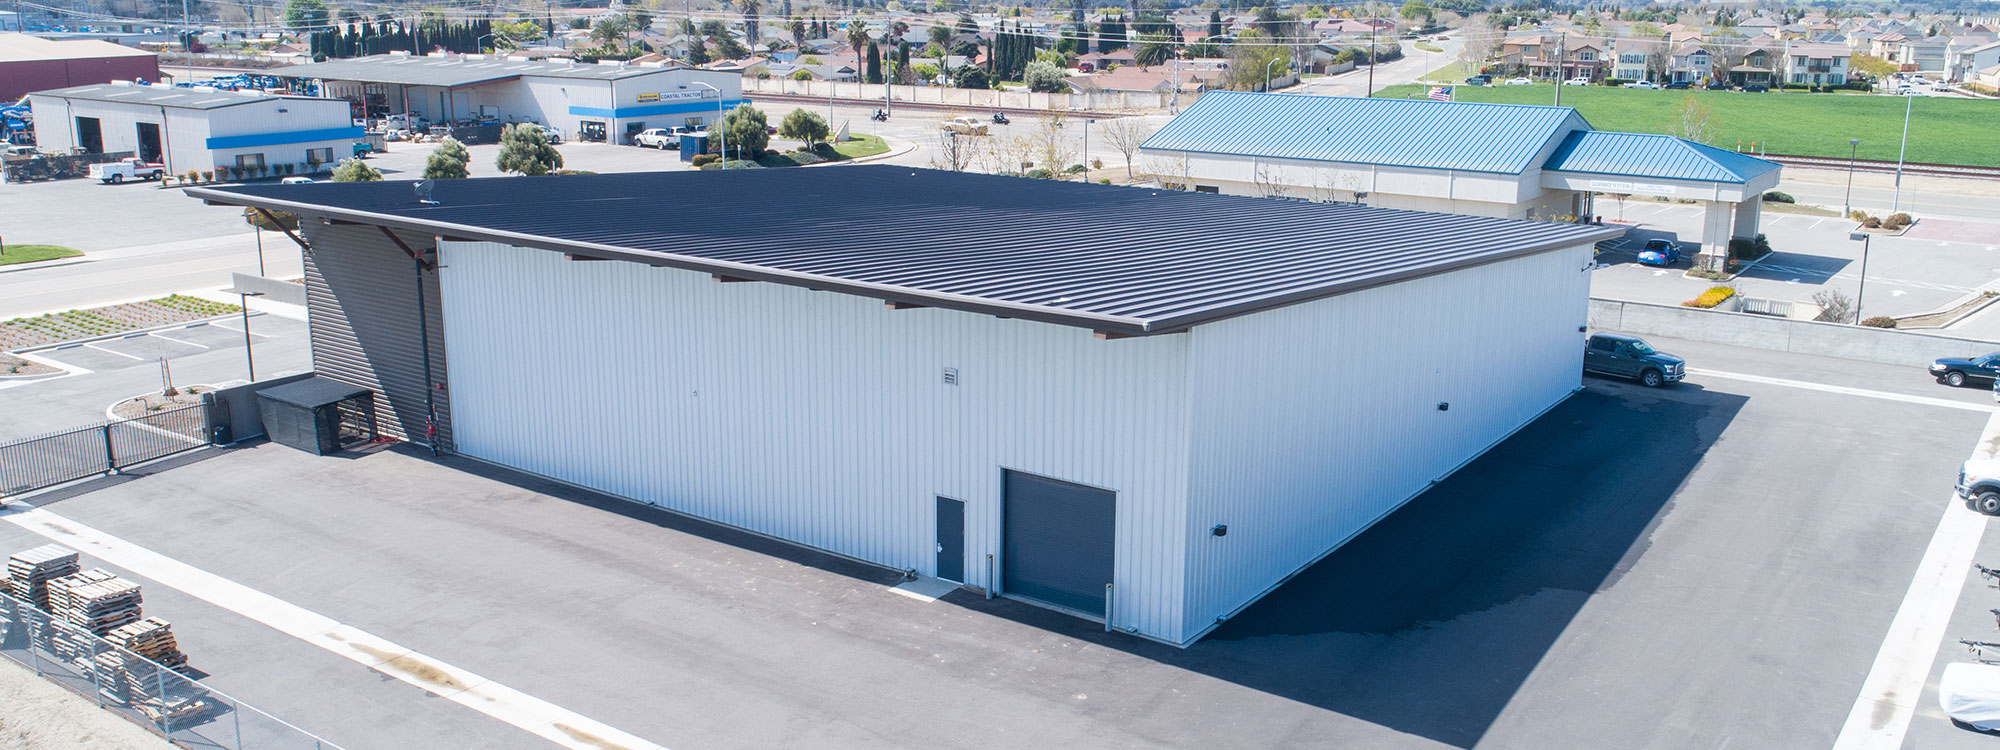 Santa Maria Seed, King City – Seed Processing Facility - Monterey County Builder - Pre-engineered Metal Building Contractor and Builder - JW Design & Construction